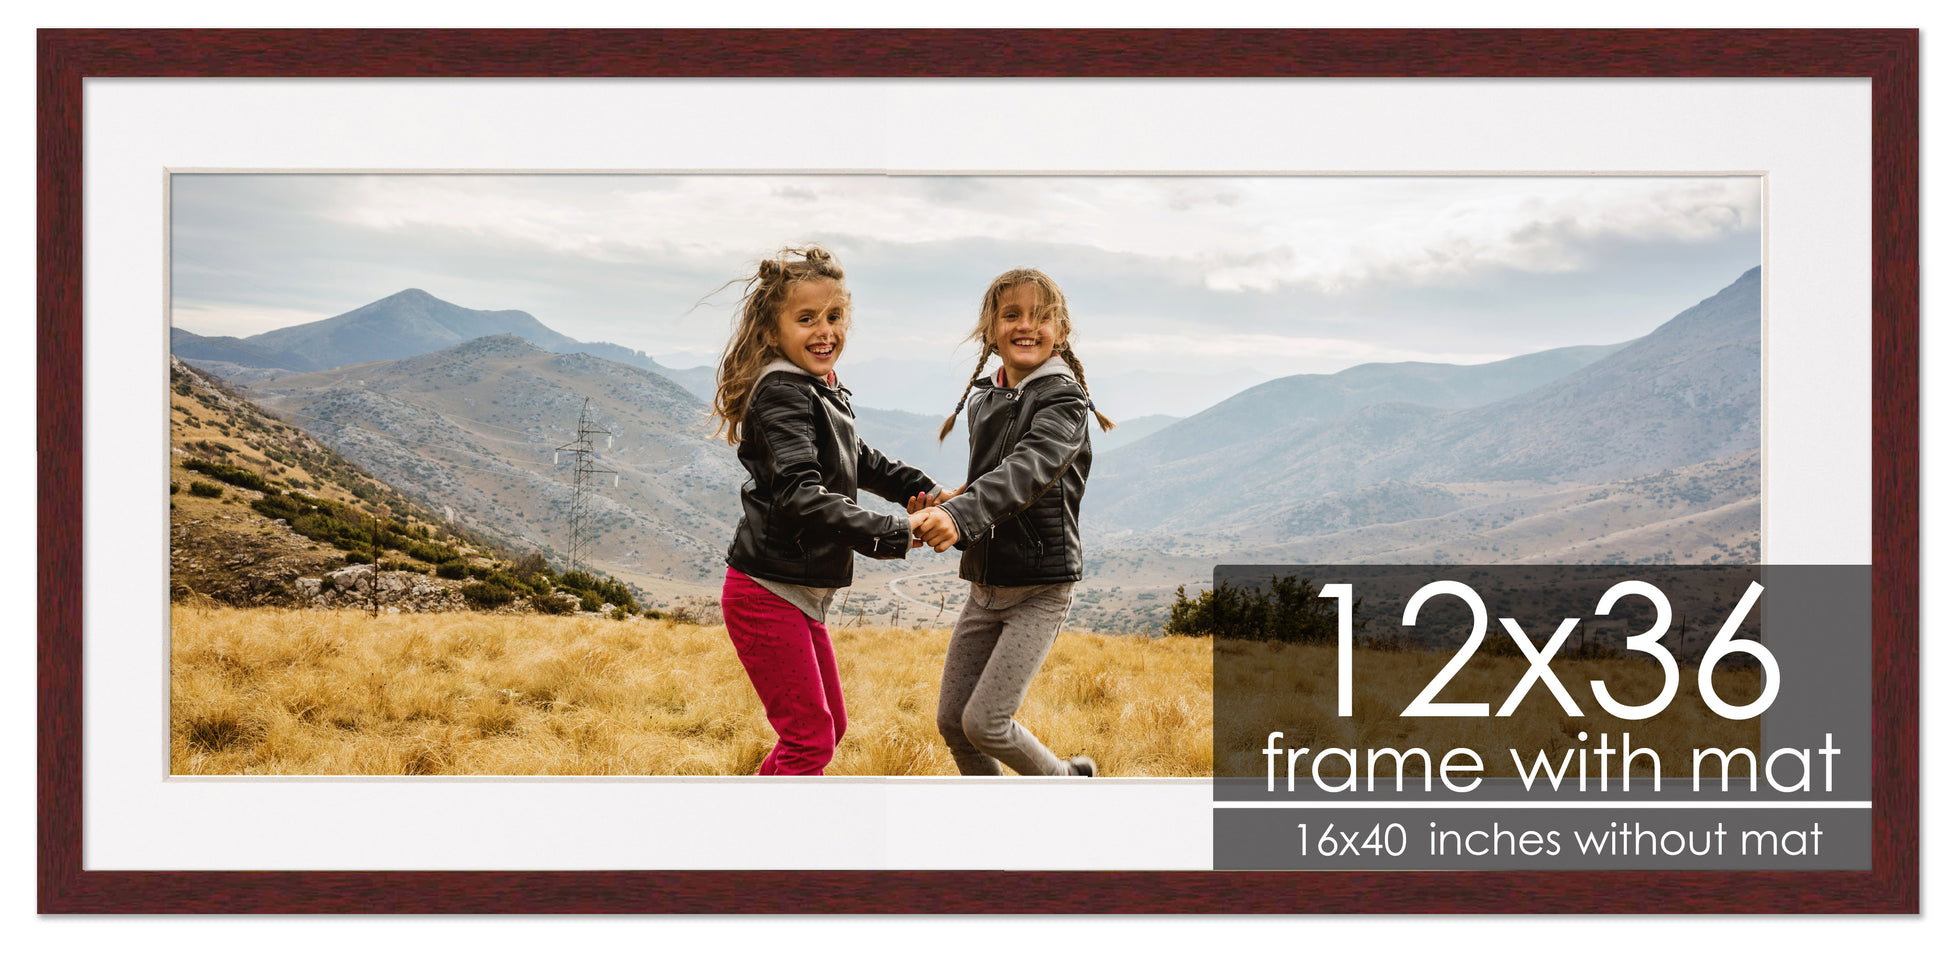 30x30 Frame White With White Picture Mat For 30x30 Print - Or 34x34 Art  Without the Photo Mat - 